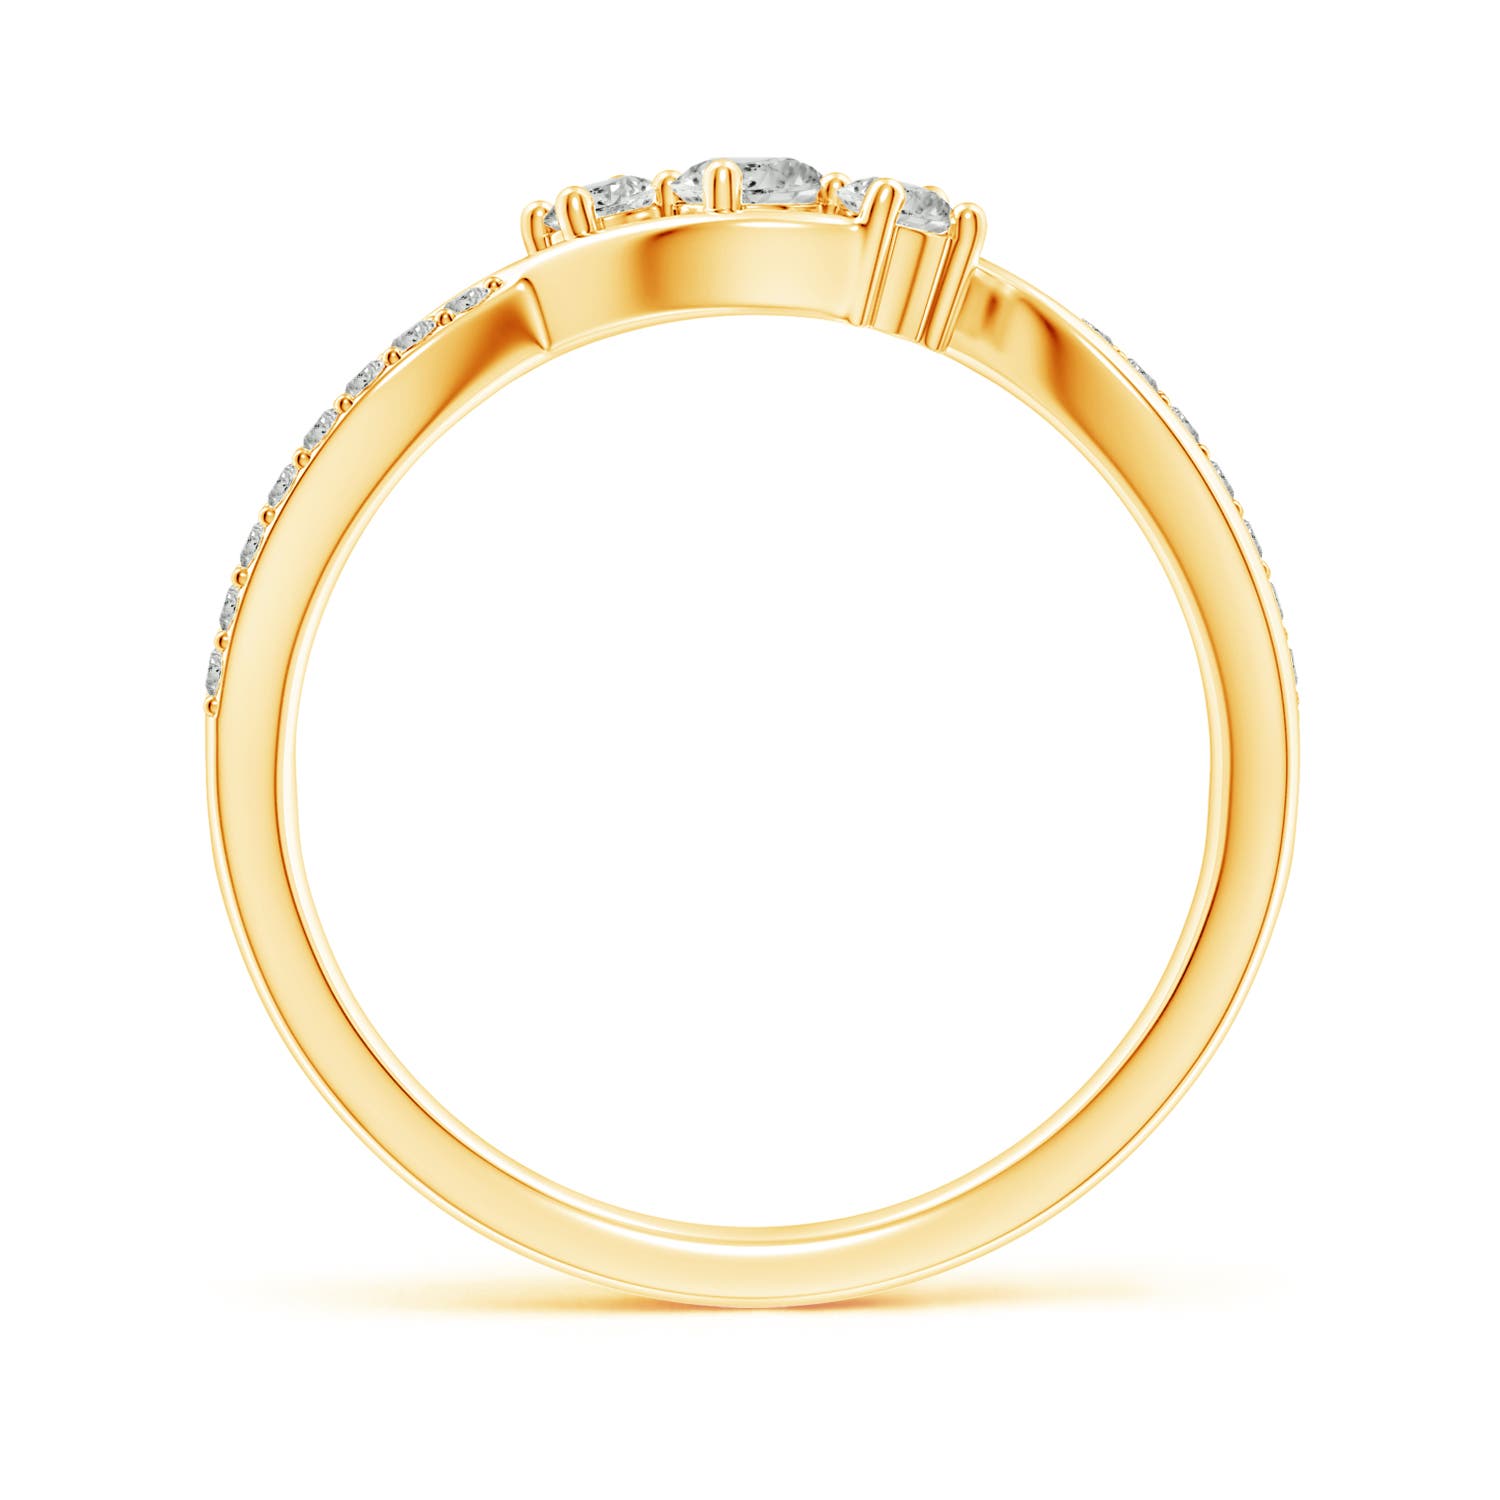 K, I3 / 0.48 CT / 14 KT Yellow Gold